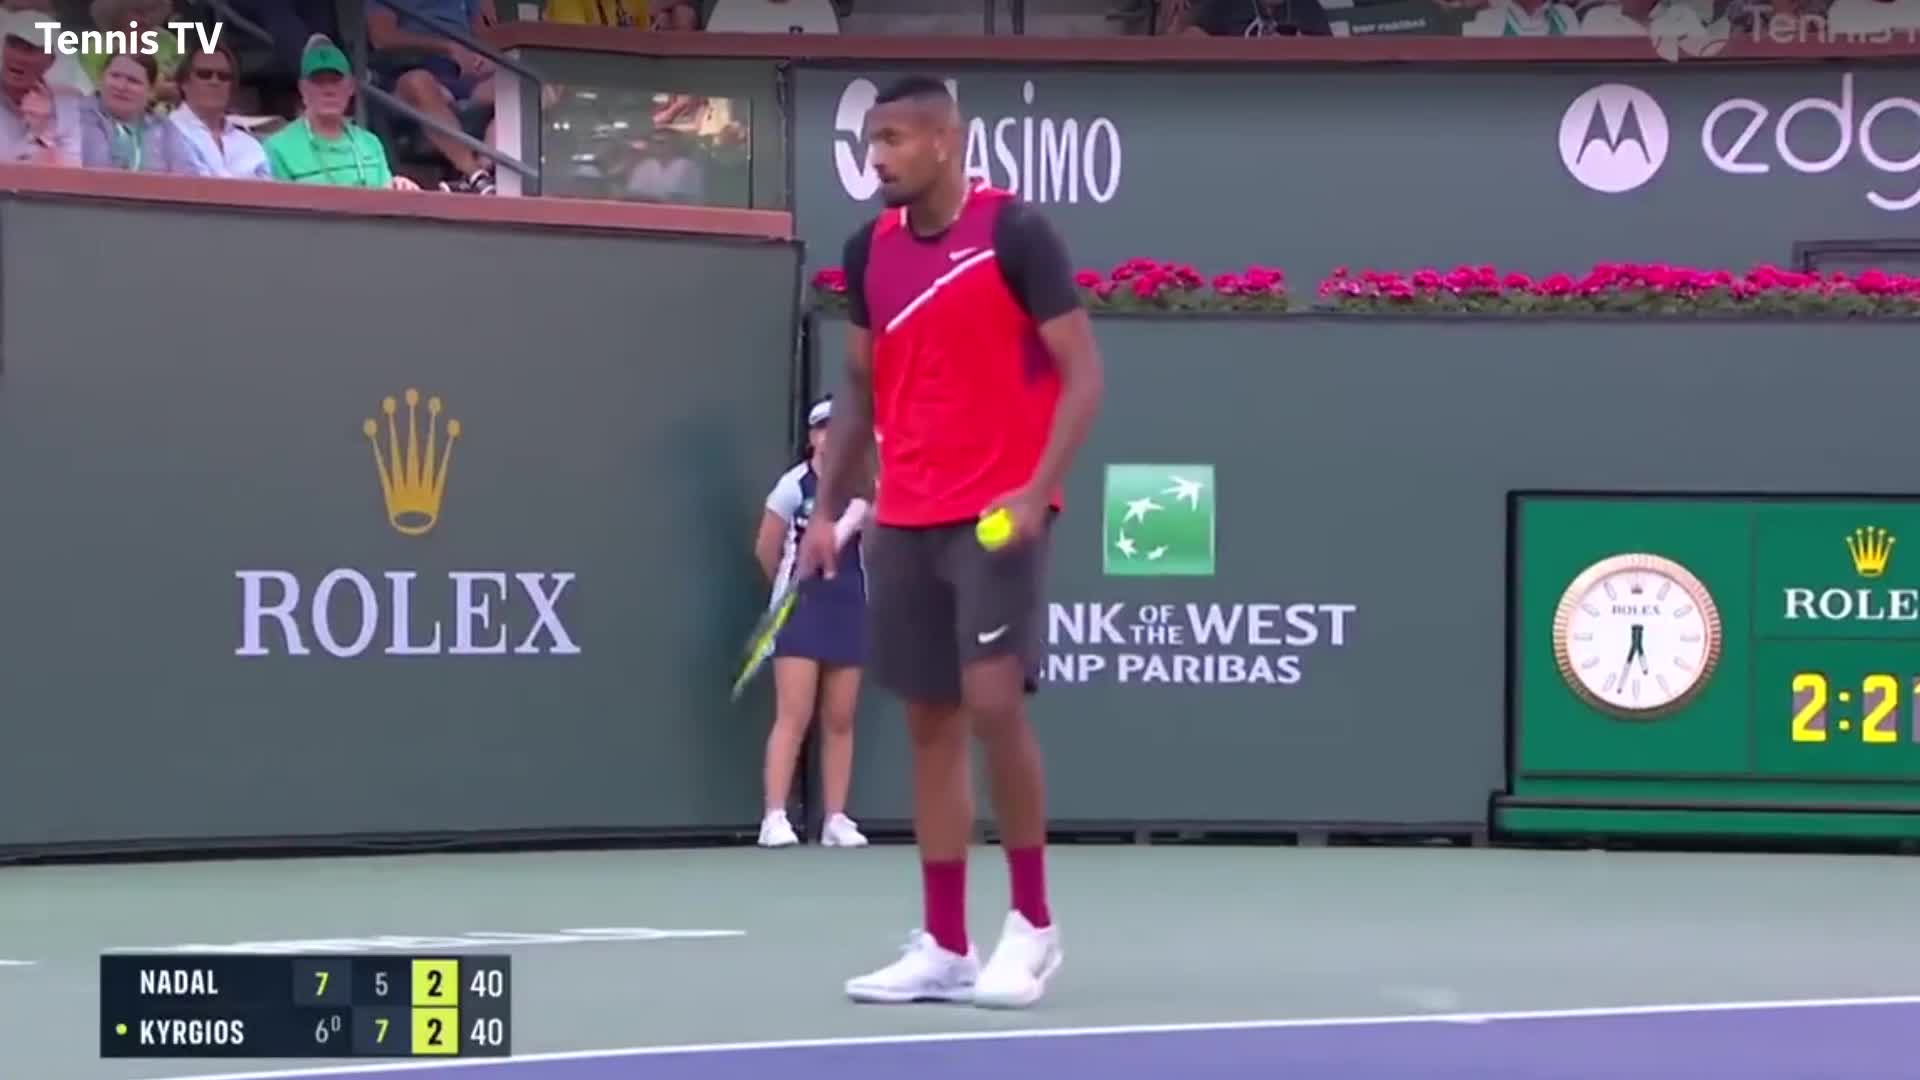 Ben Stiller is dragged into Nick Kyrgios argument with heckler during tennis match